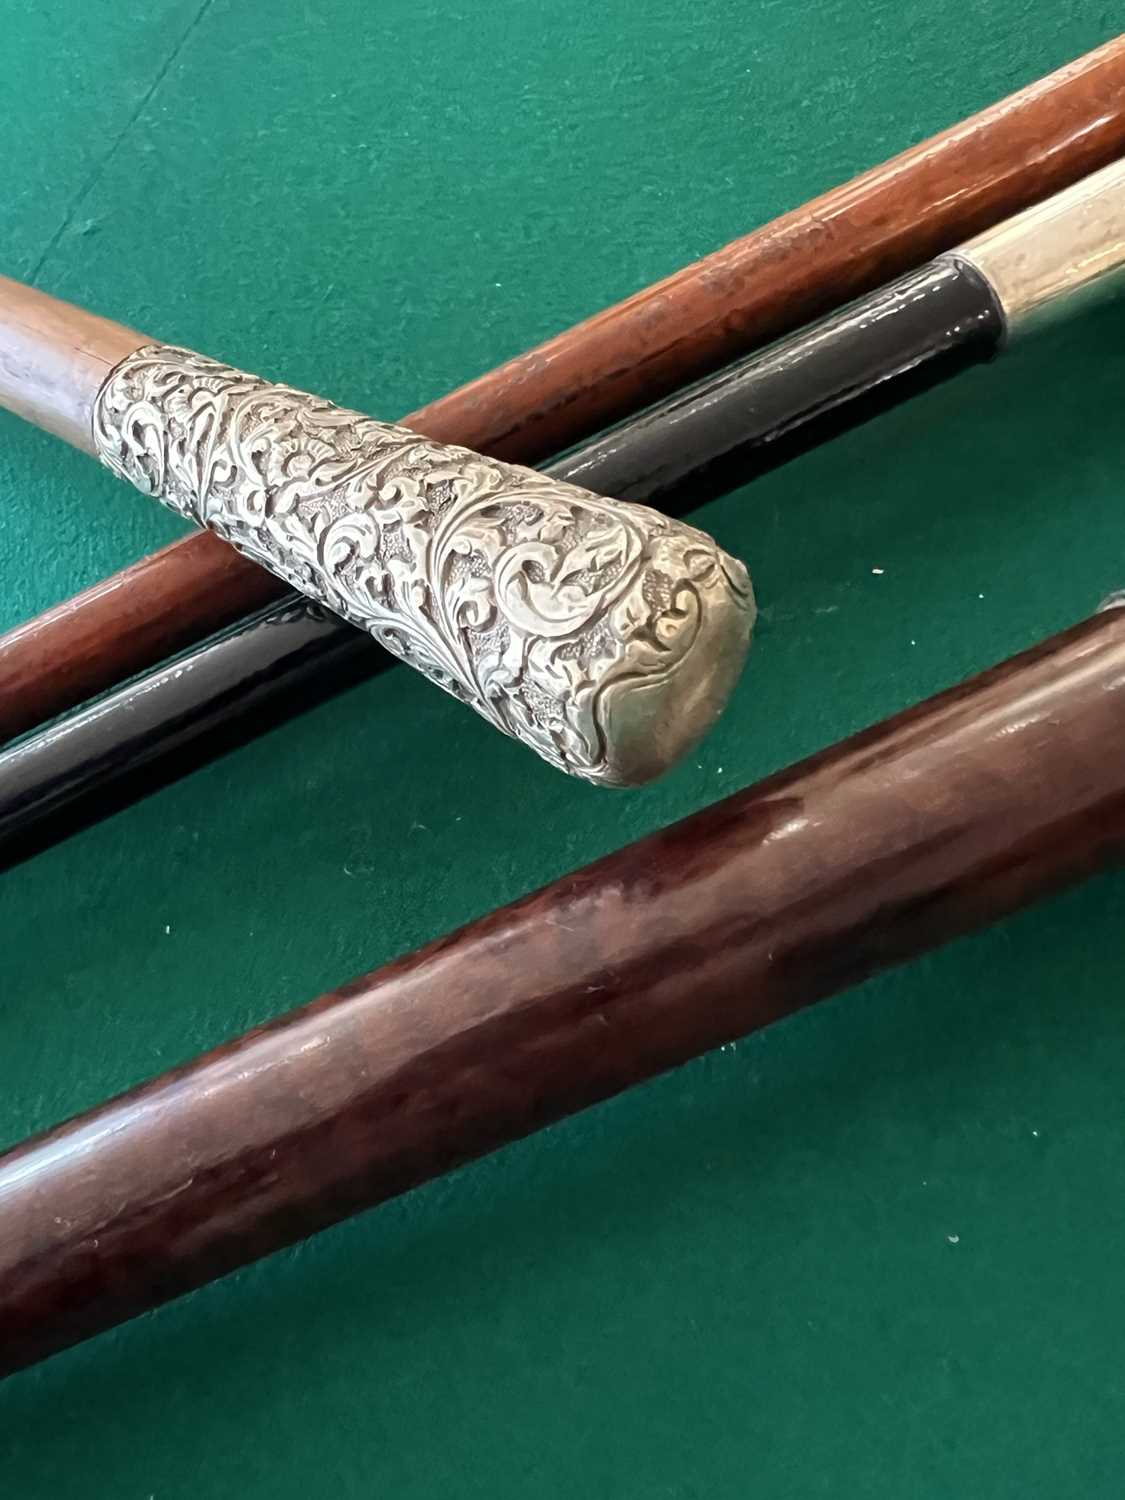 FOUR LATE 19TH / EARLY 20TH CENTURY WALKING CANES INCLUDING A VICTORIAN EXAMPLE WITH SILVER POMMEL - Image 3 of 6